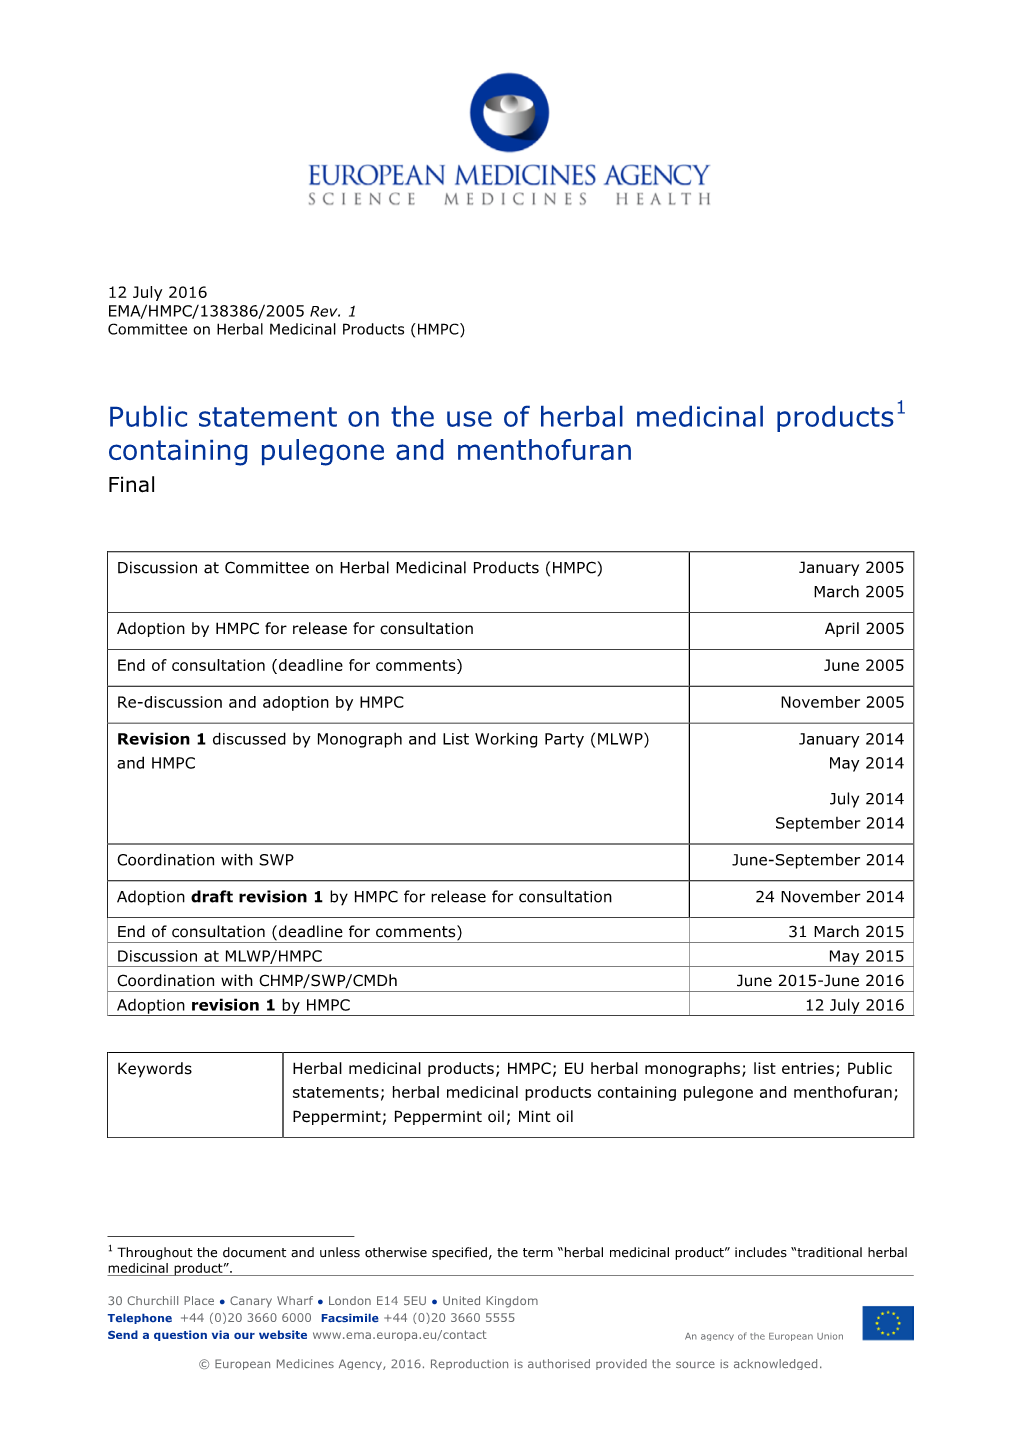 Public Statement on the Use of Herbal Medicinal Products1 Containing Pulegone and Menthofuran Final